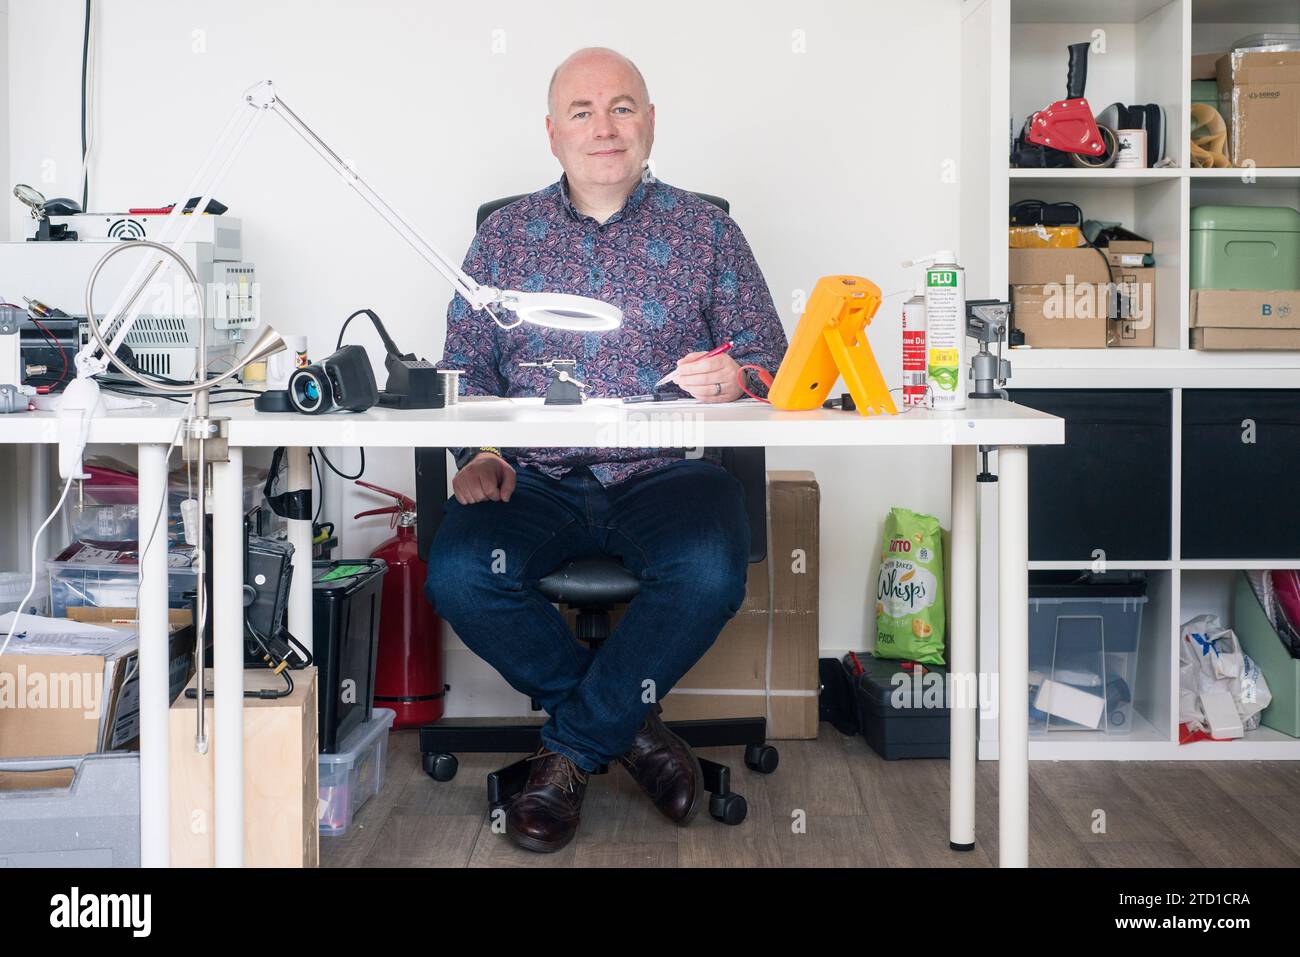 A small business owner and technology manufacturer poses for a portrait at their work station in their industrial unit. Stock Photo